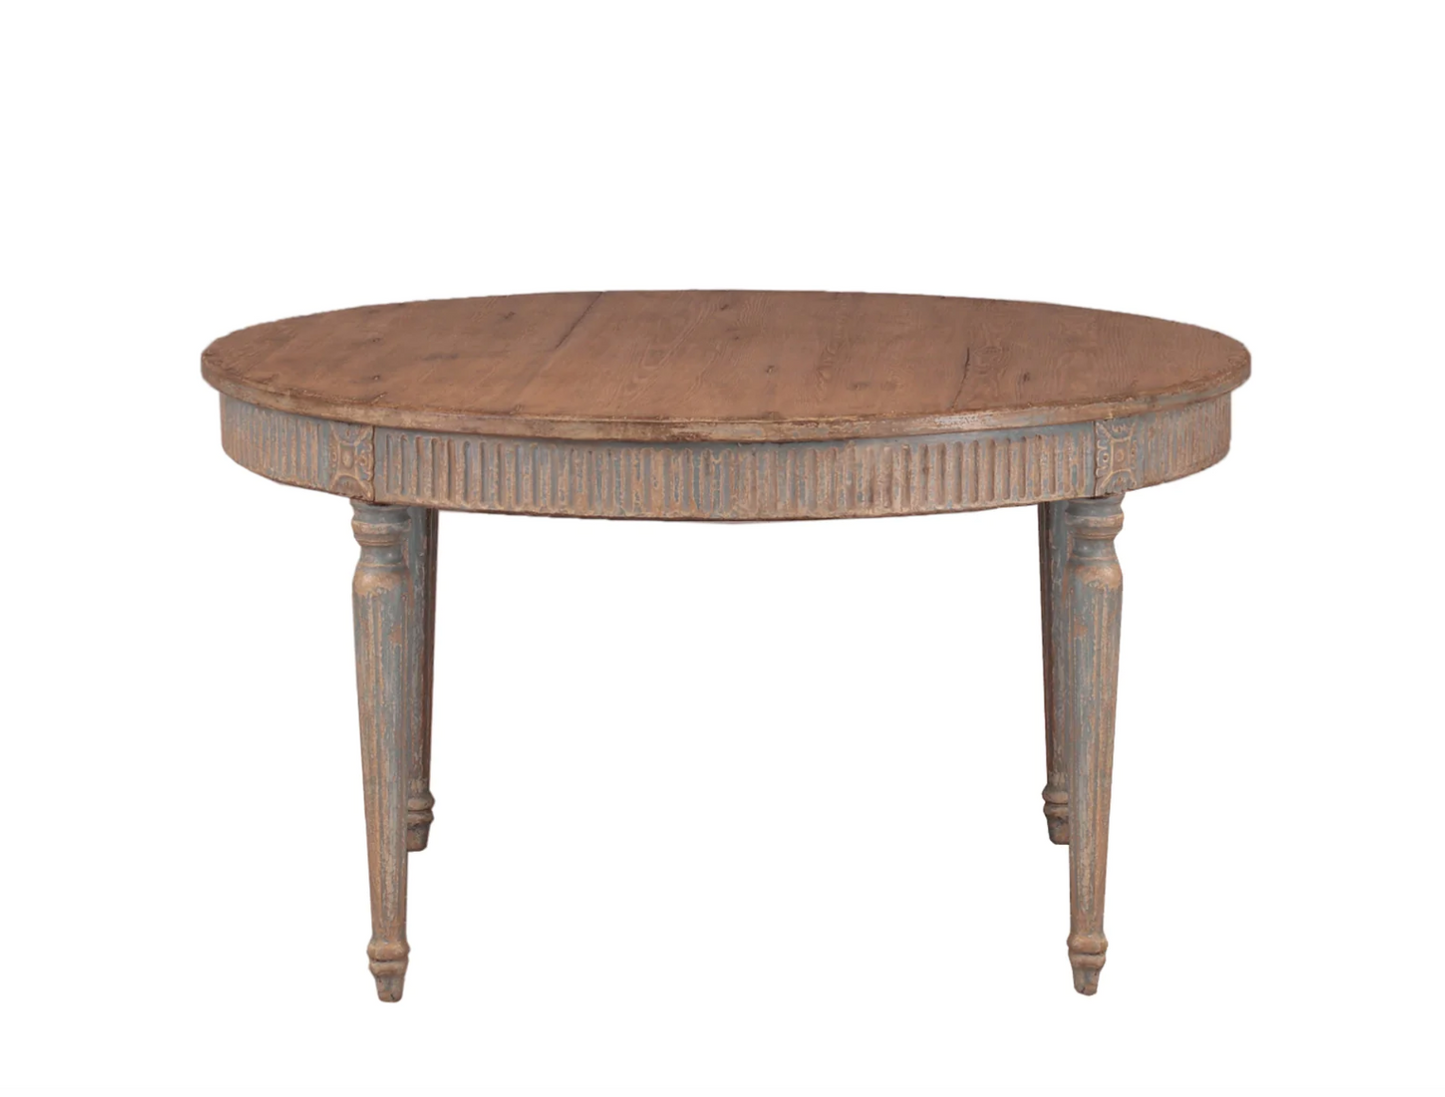 CASSIS ROUND TABLE